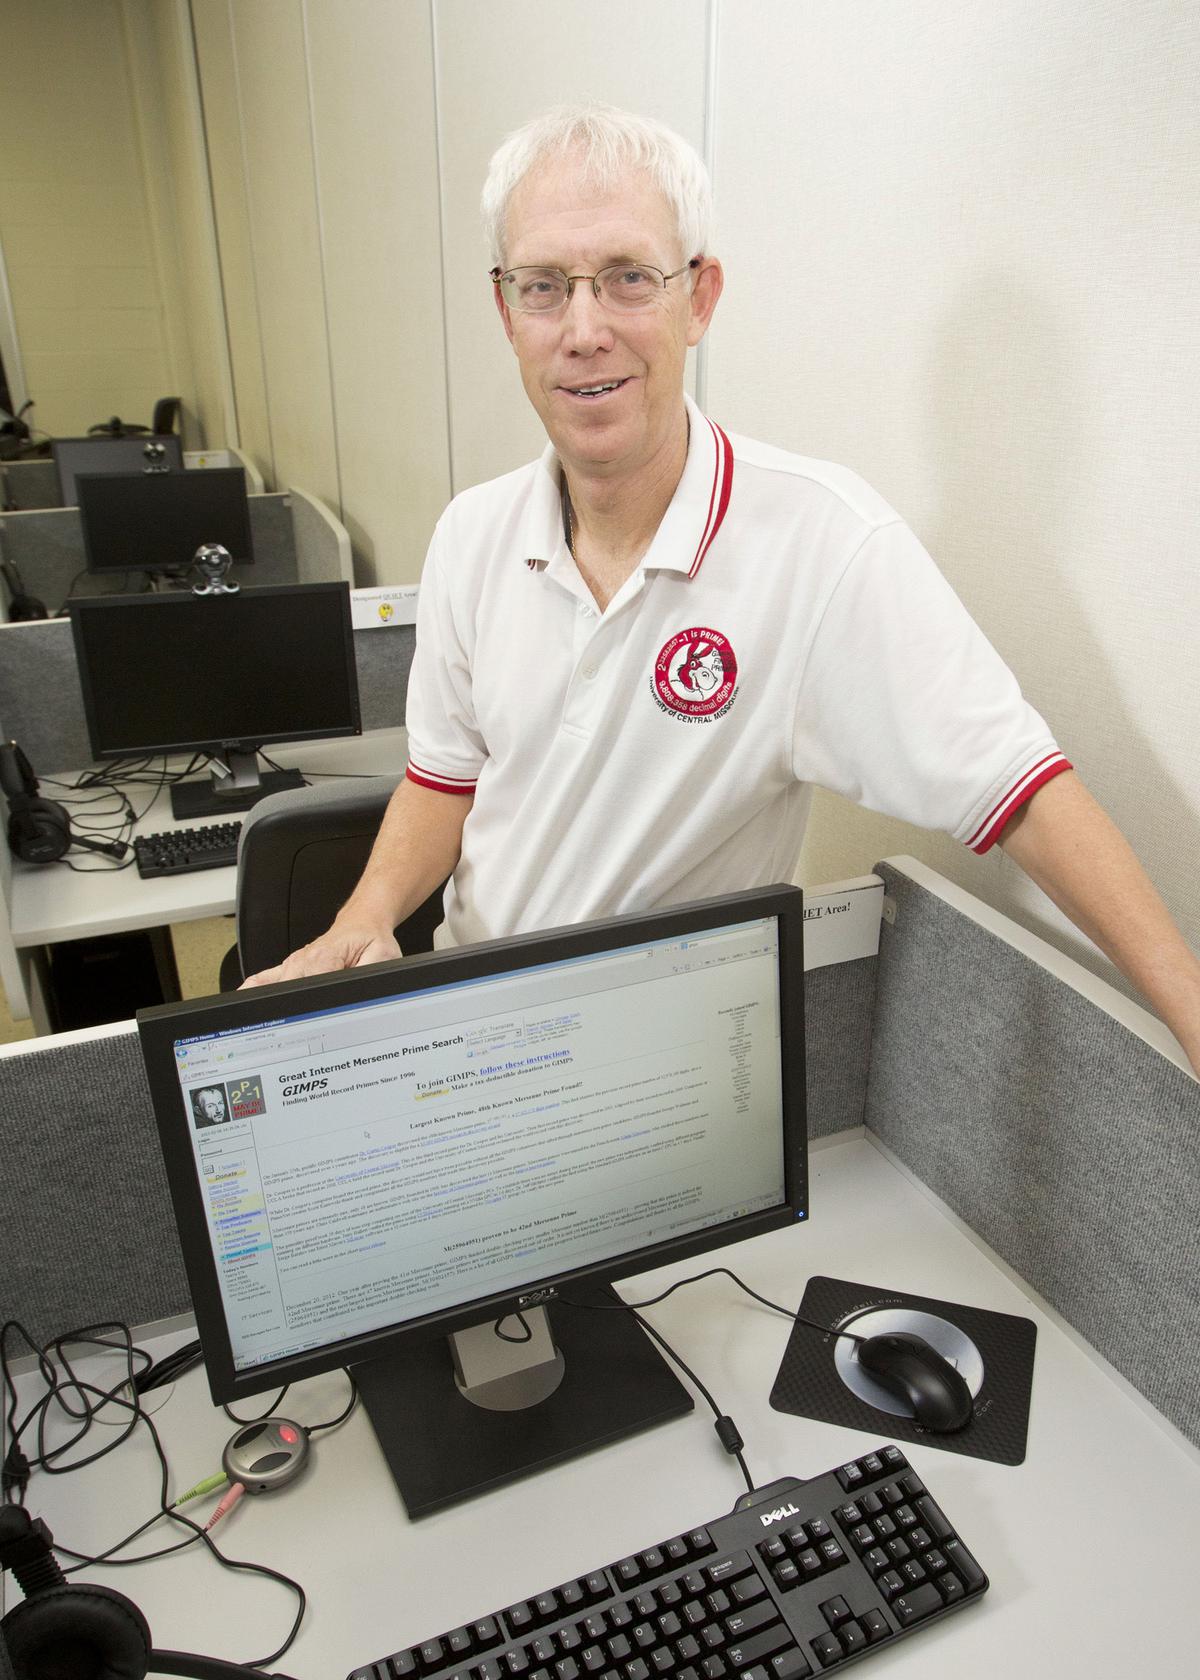 This photo provided by the University of Central Missouri shows computer science and mathematics professor Curtis Cooper. A group led by Cooper found the 48th known Mersenne prime in January 2013.  You can see the monitor in the picture having information about GIMPS.